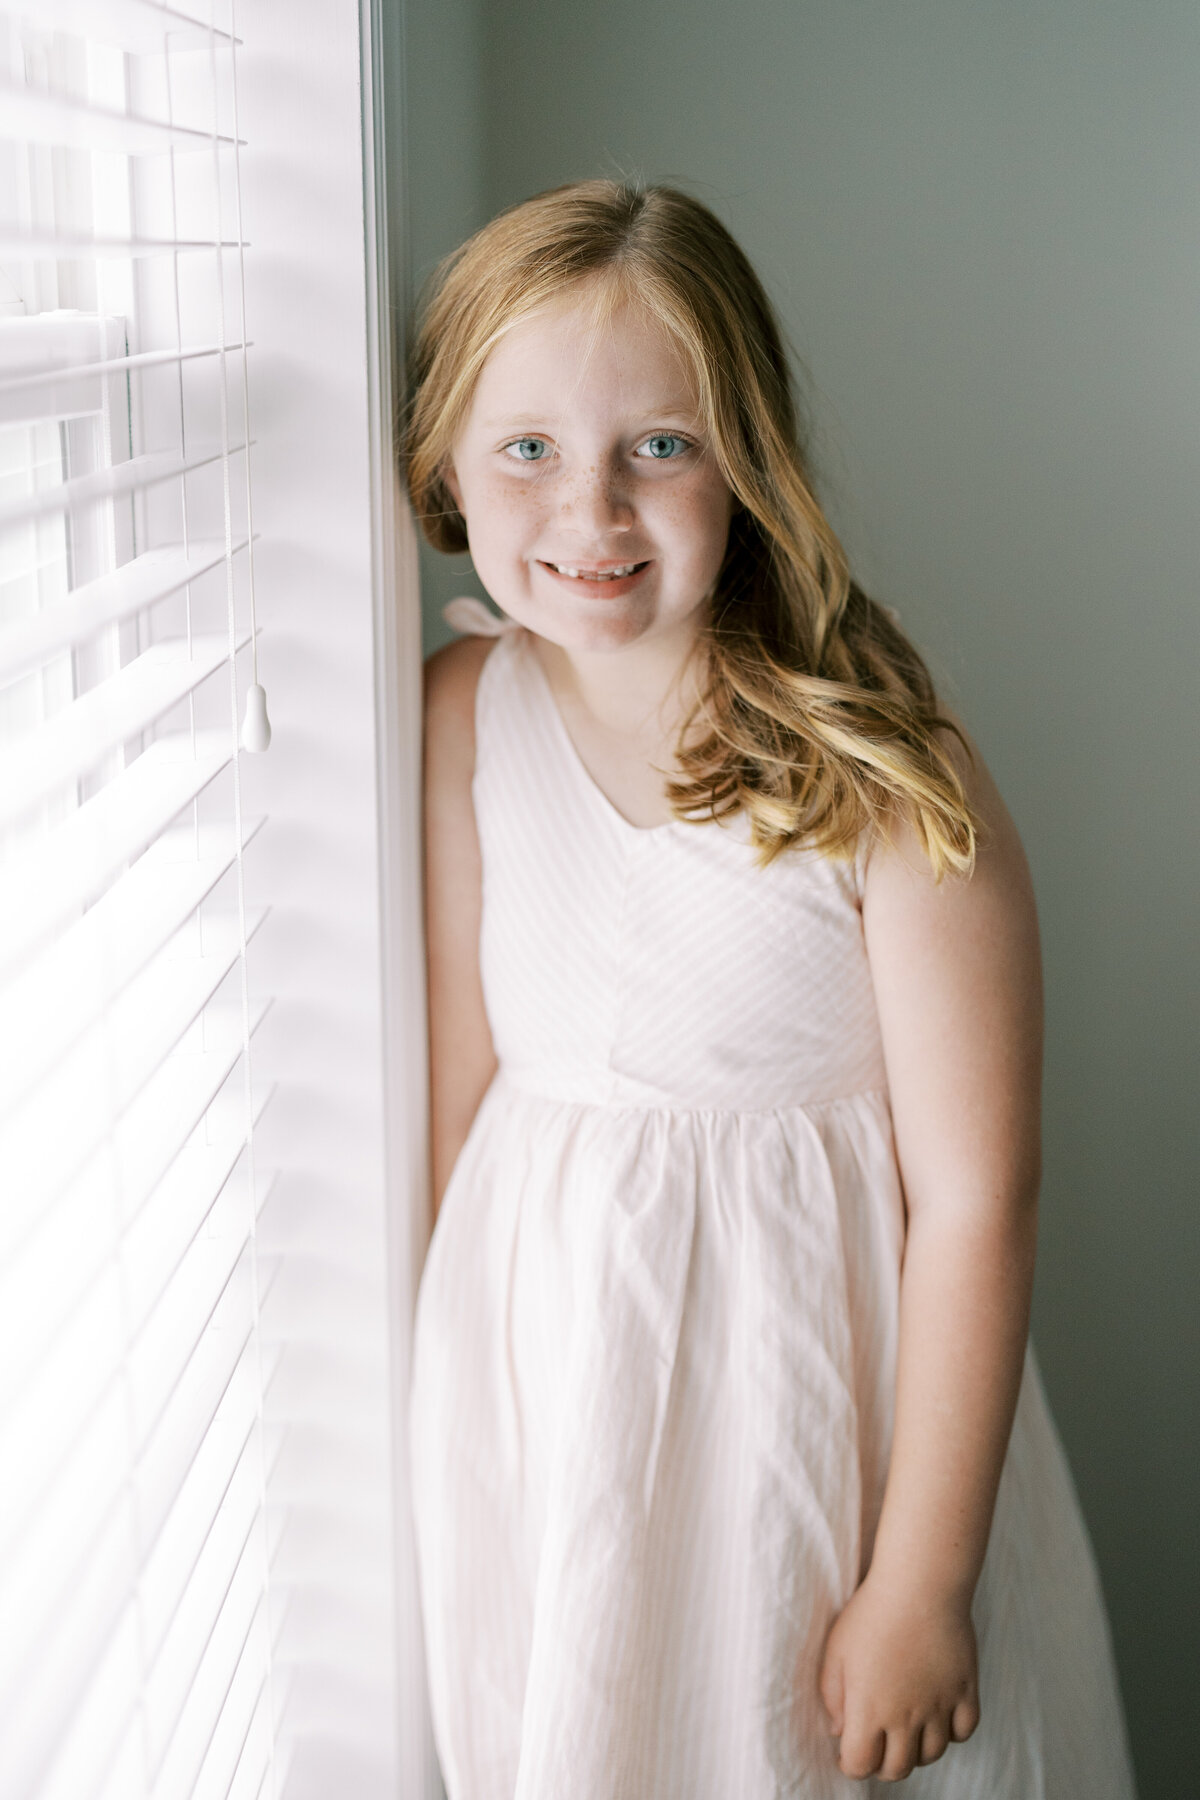 In-Home Family Photos in Central Pennsylvania | Ashlee Zimmerman